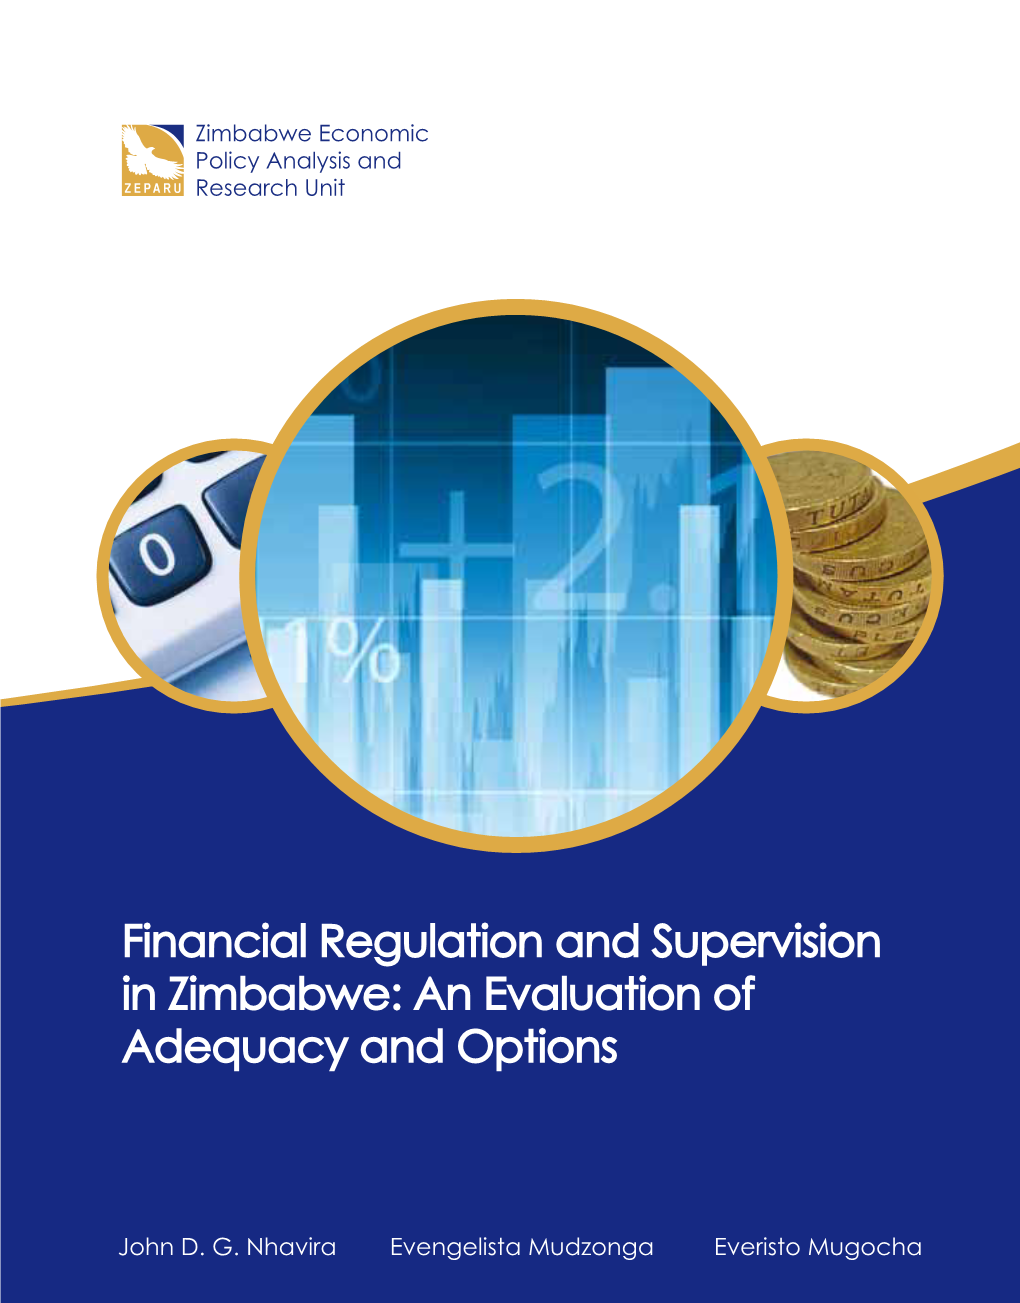 Financial Regulation and Supervision in Zimbabwe: an Evaluation of Adequacy and Options